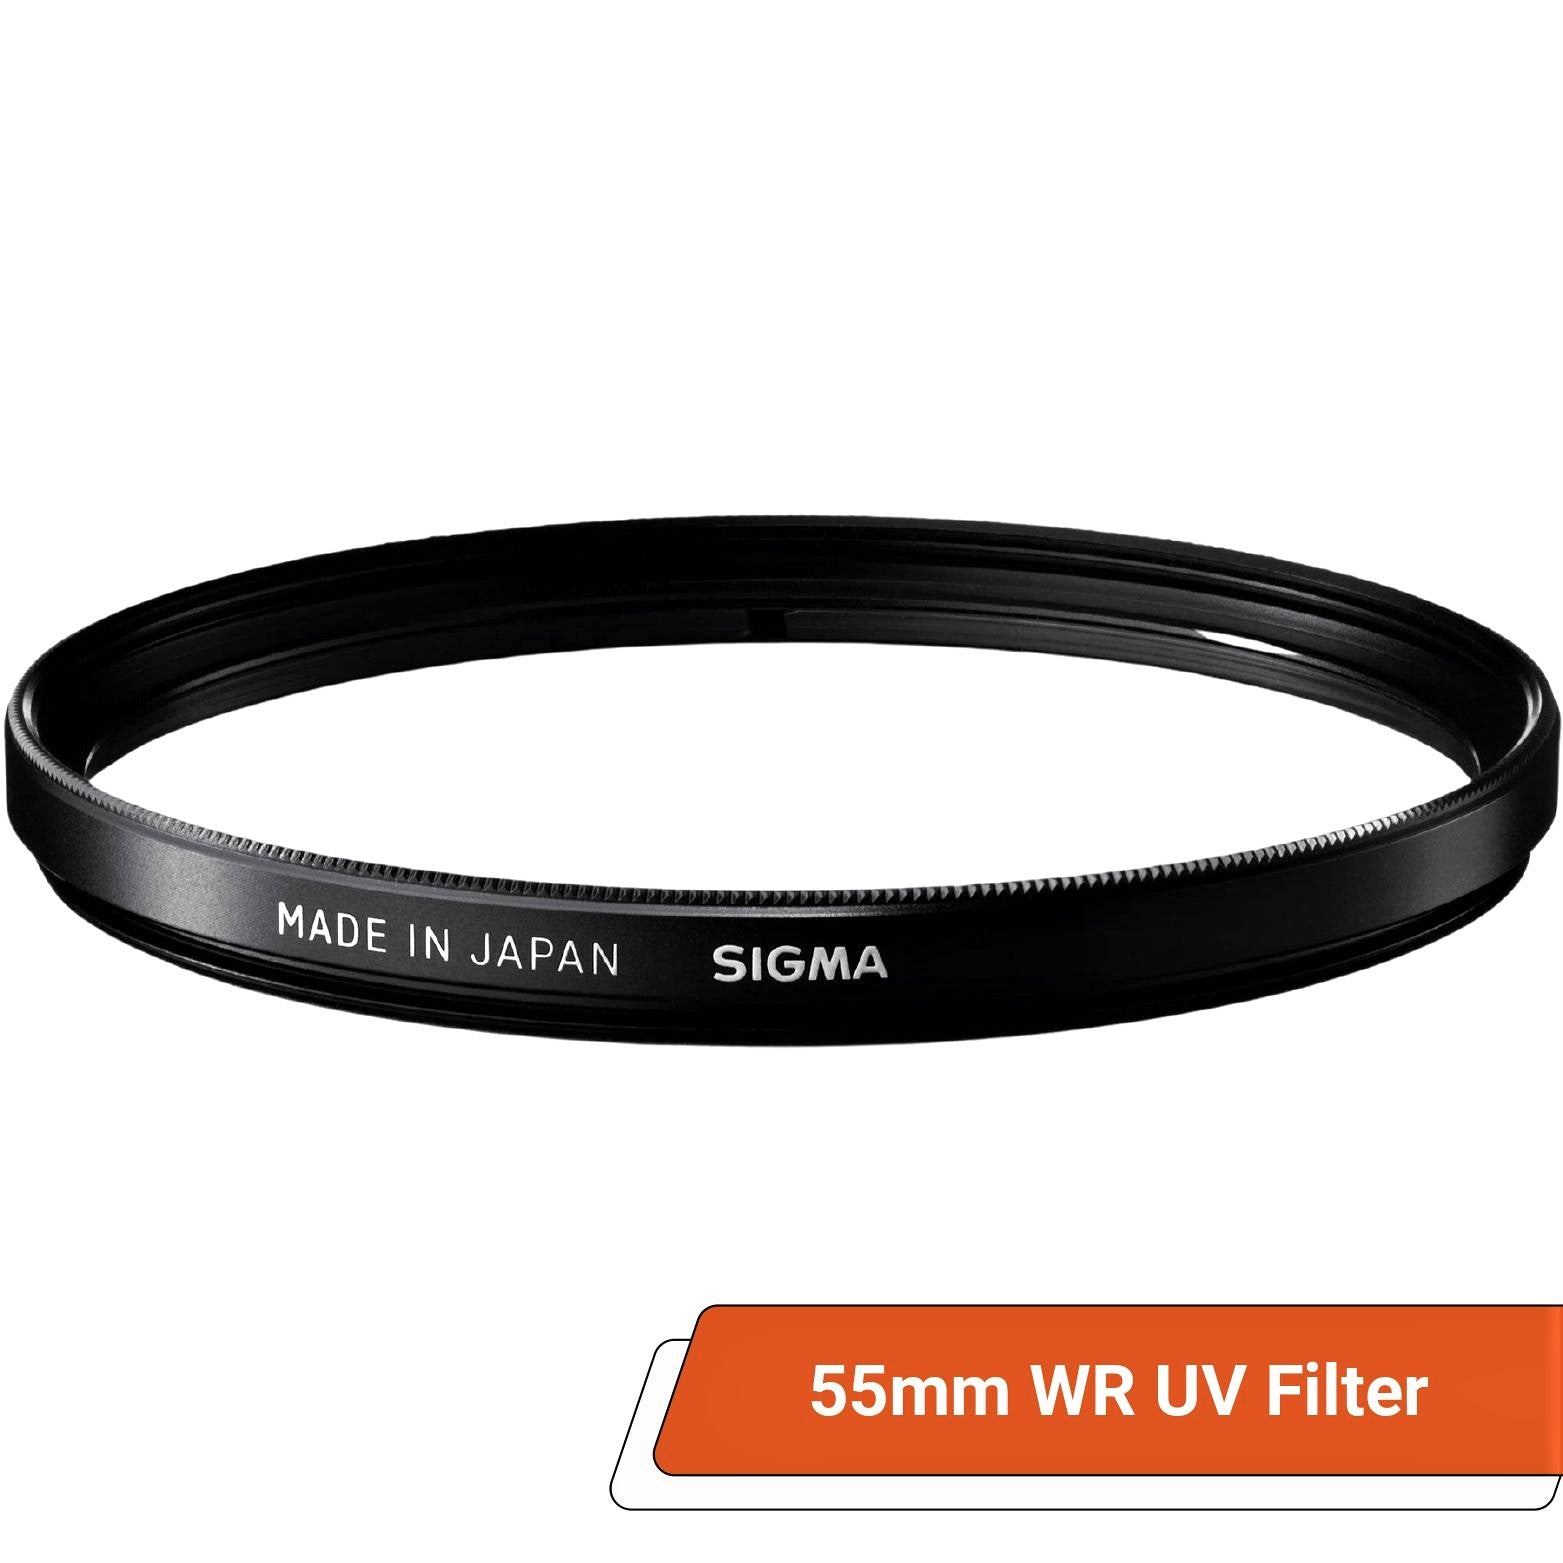 Sigma 55mm WR (Water Repellent) UV Filter